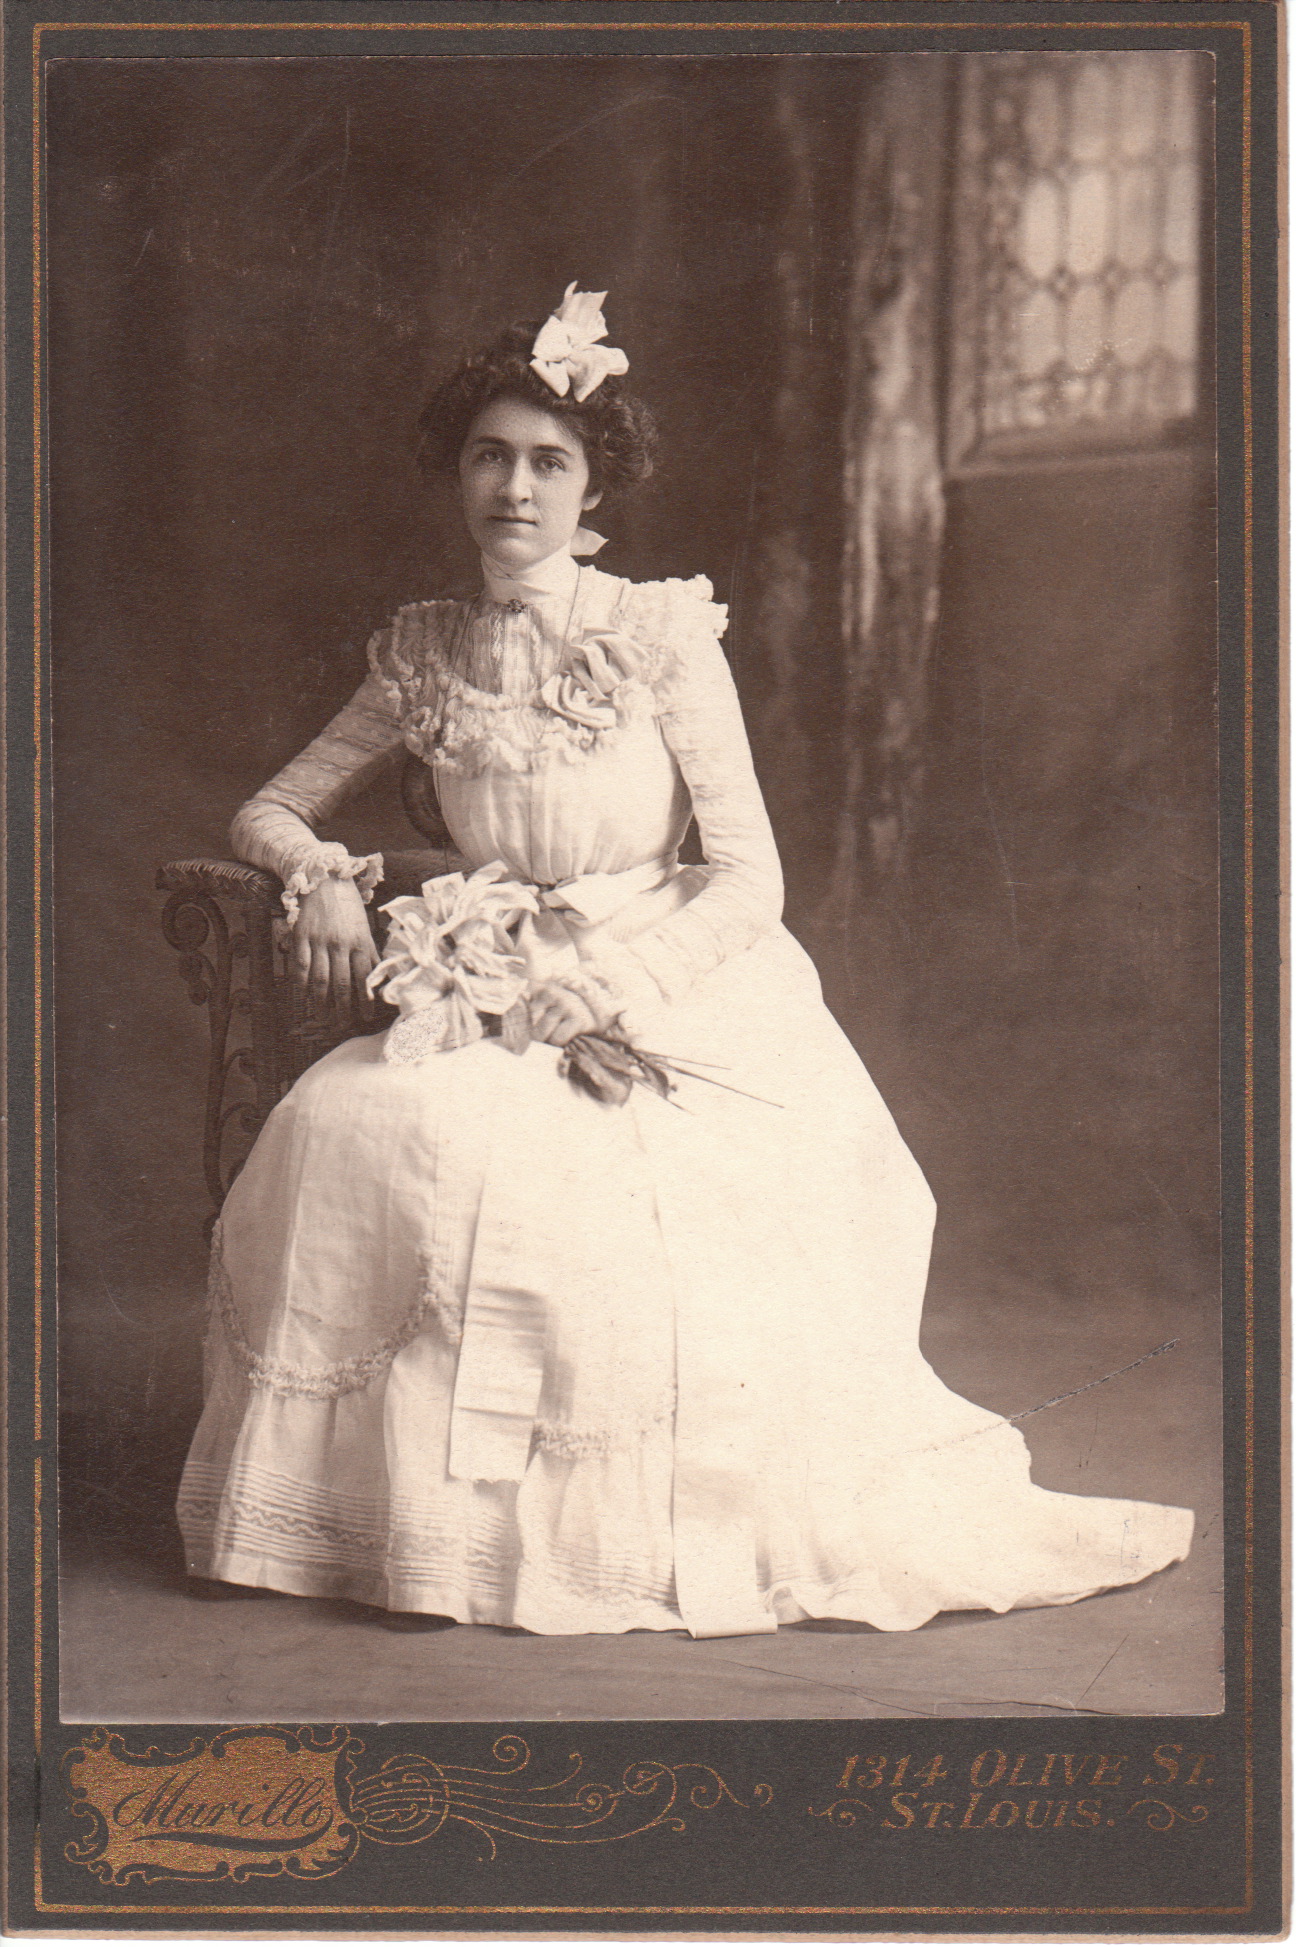 Photographer: Murillo | THE CABINET CARD GALLERY